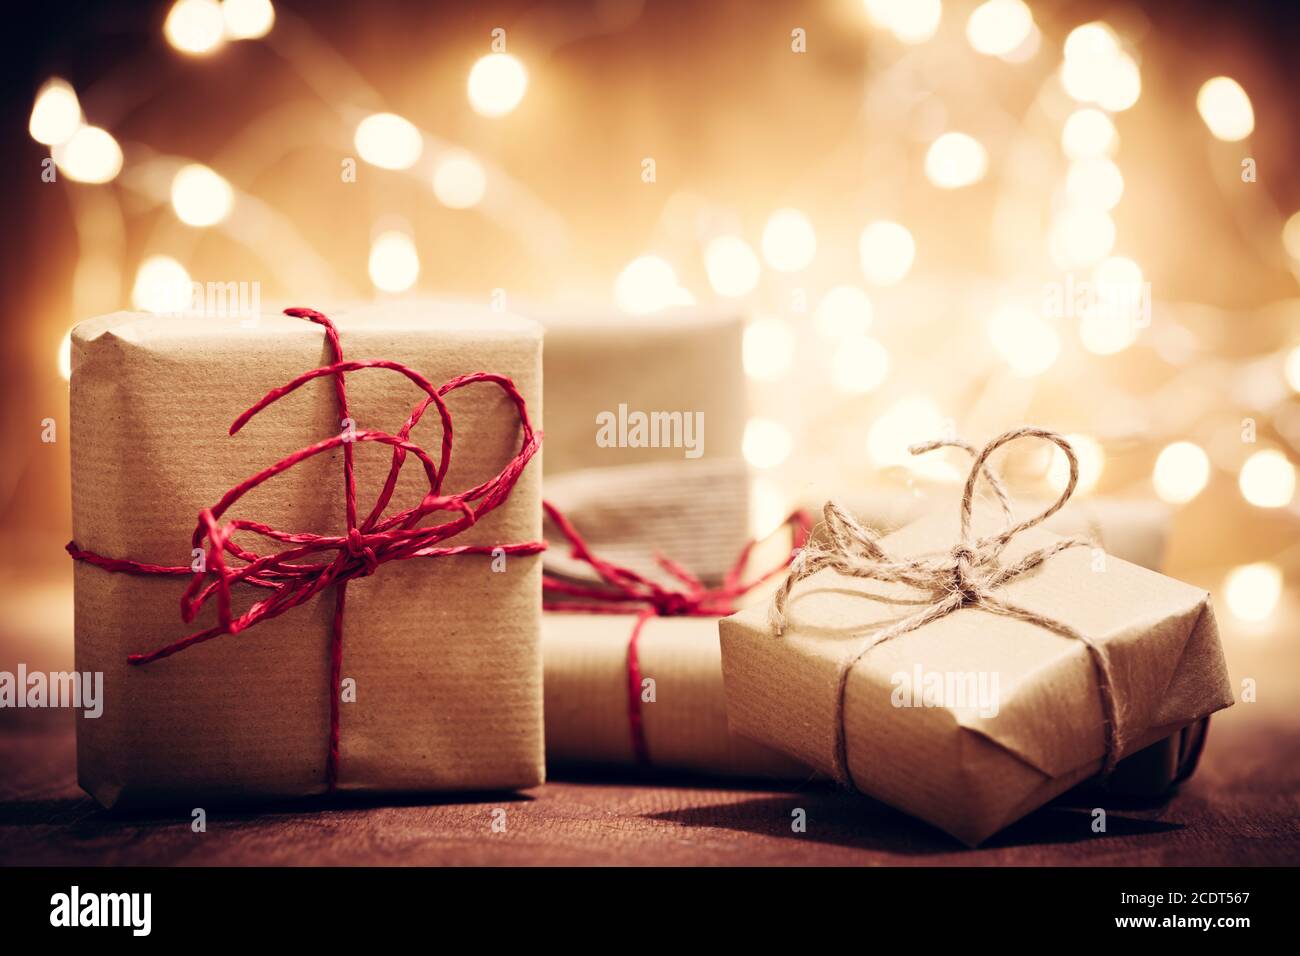 Rustic retro gifts, present boxes on glitter background. Christmas time Stock Photo